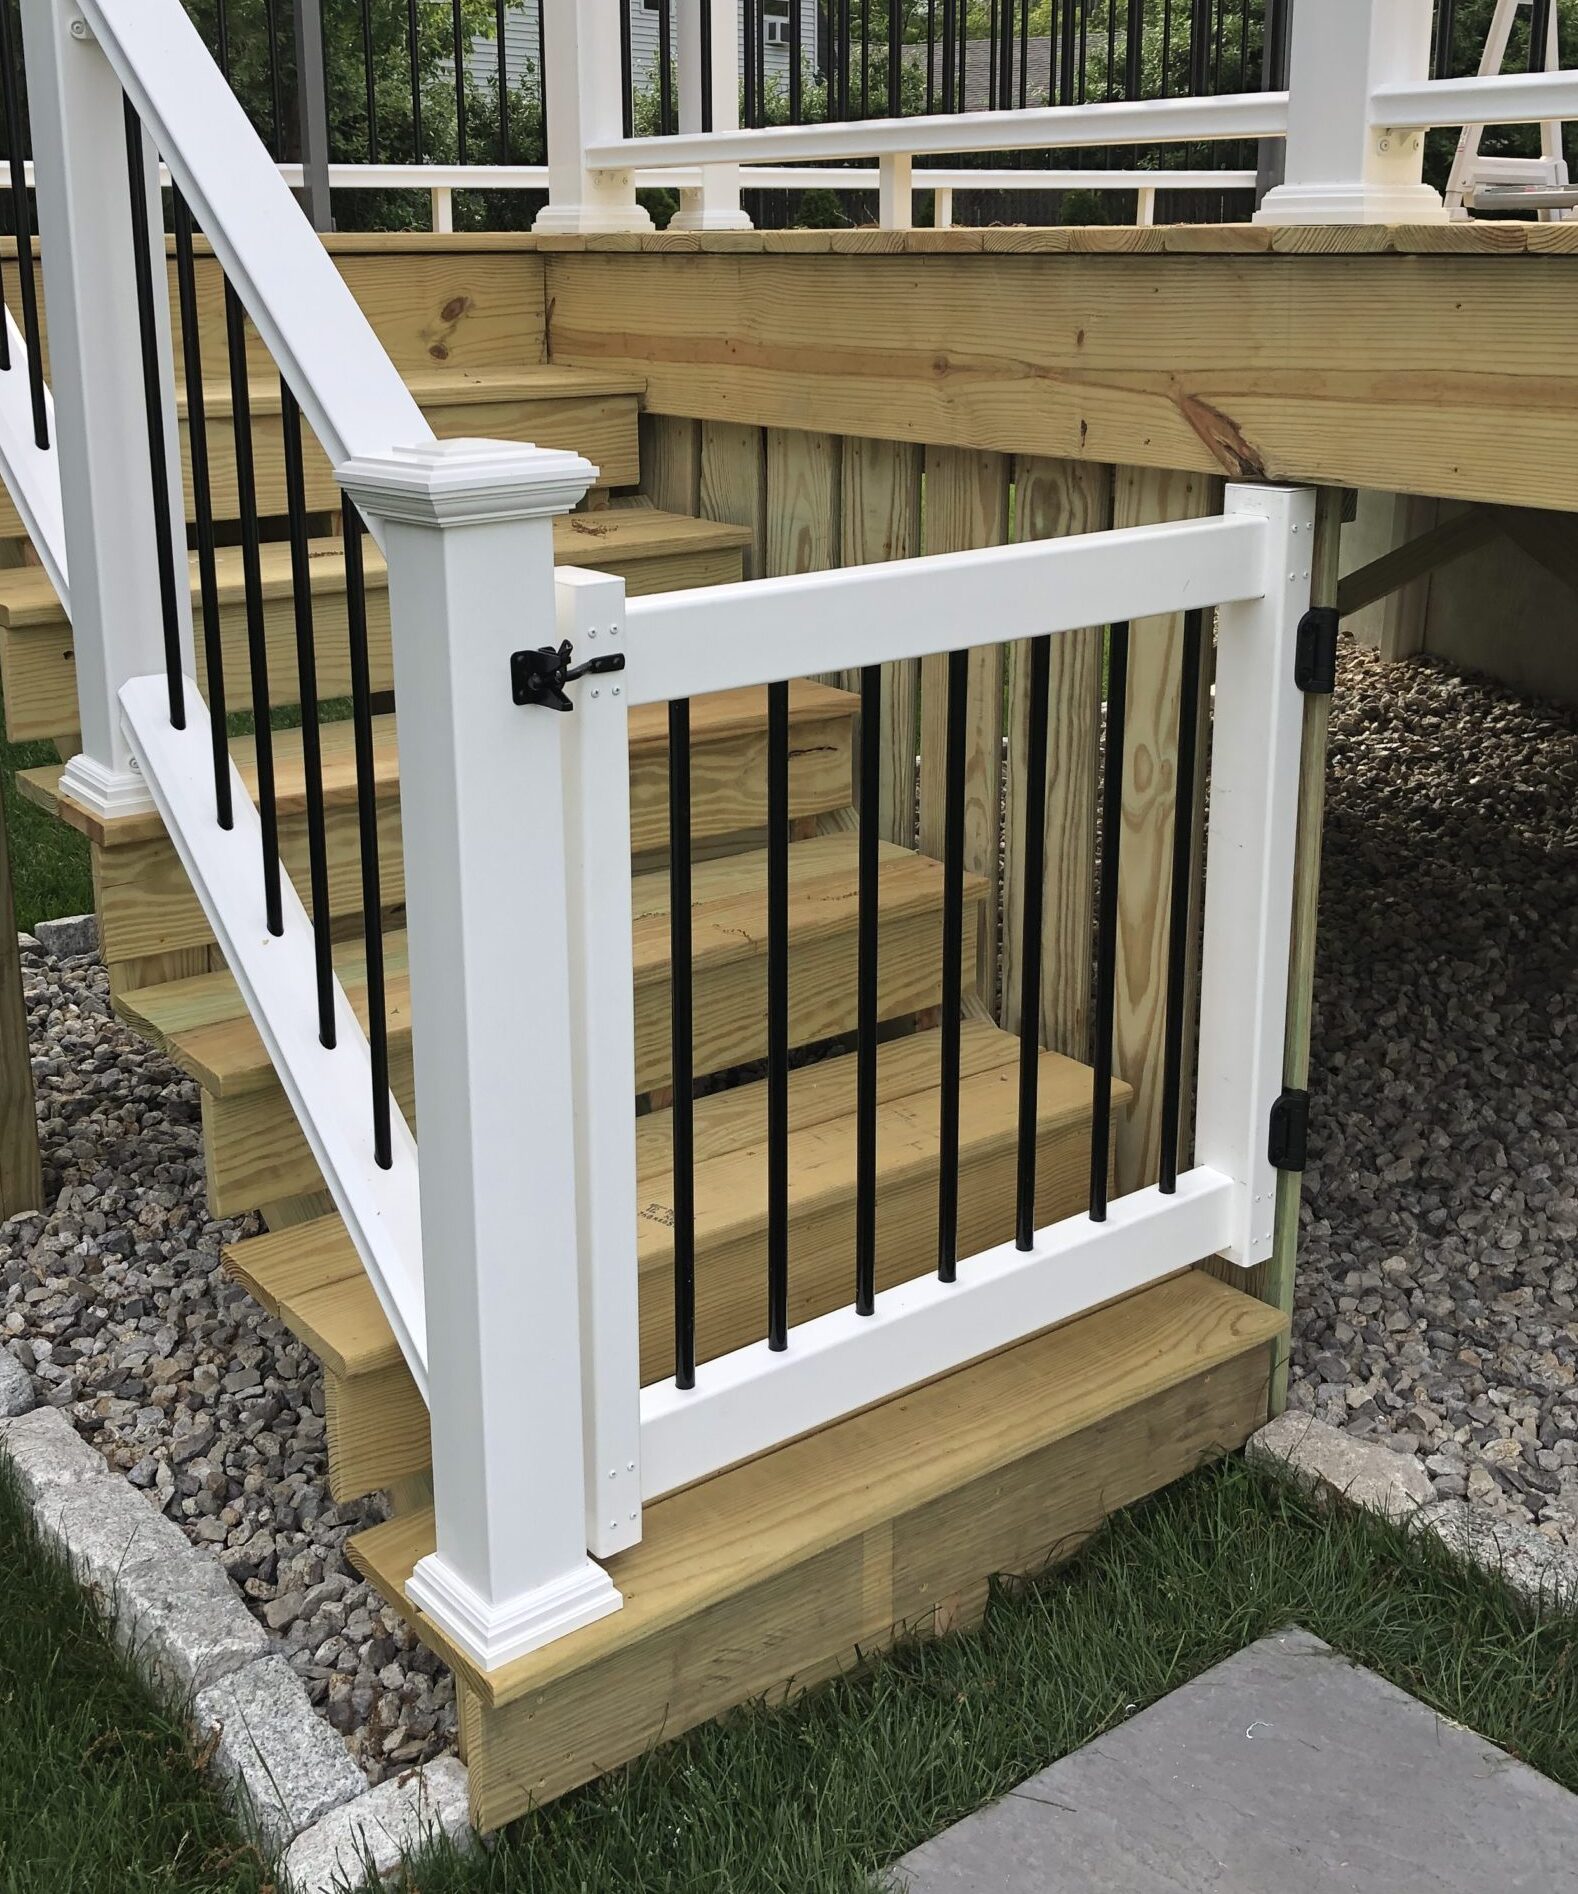 Vinyl Deck Gate Kit Colors Round or Square The Deck Barn